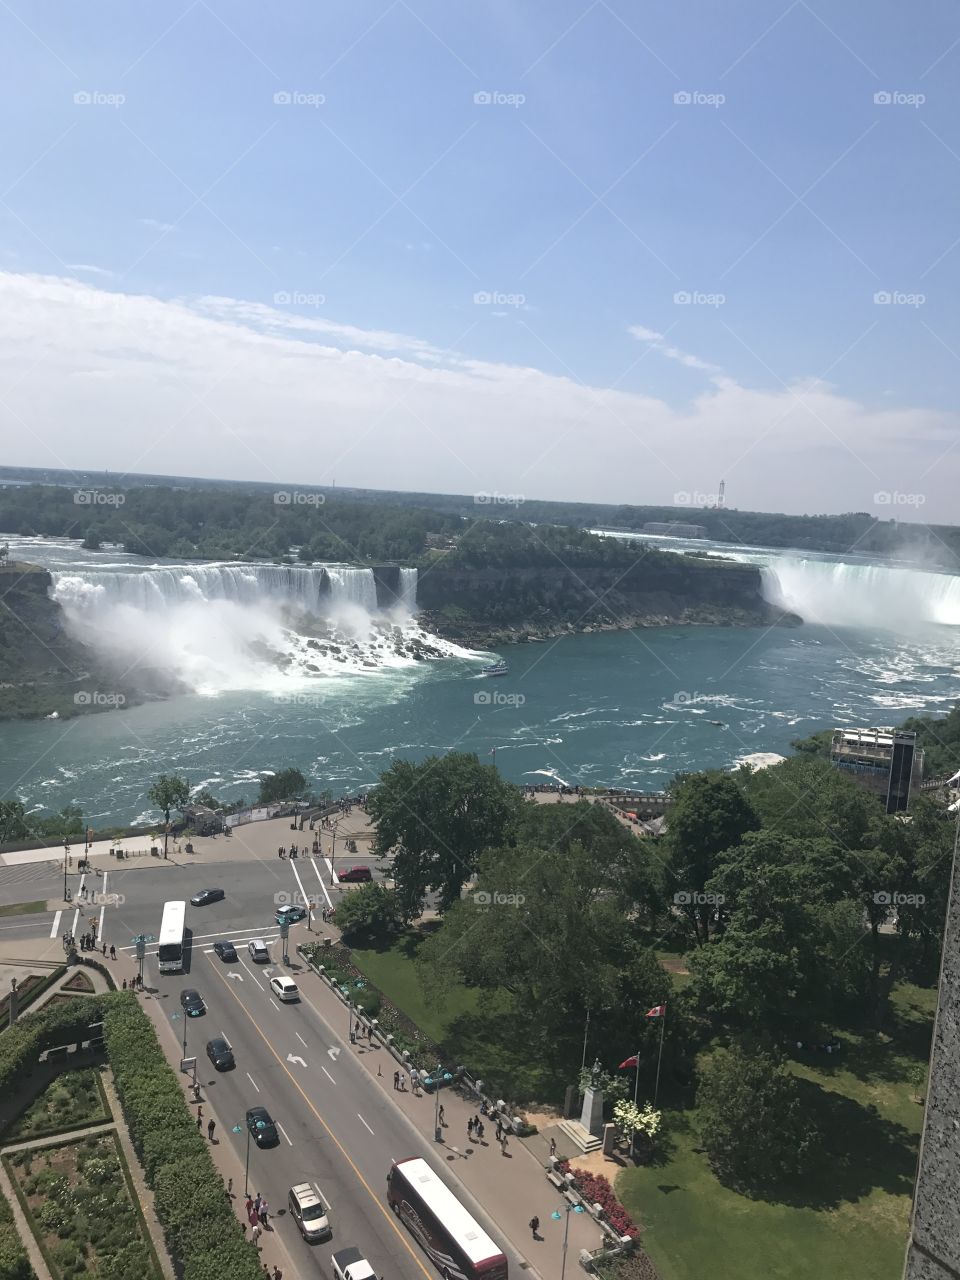 View of Niagra Falls from our Canadian hotel room